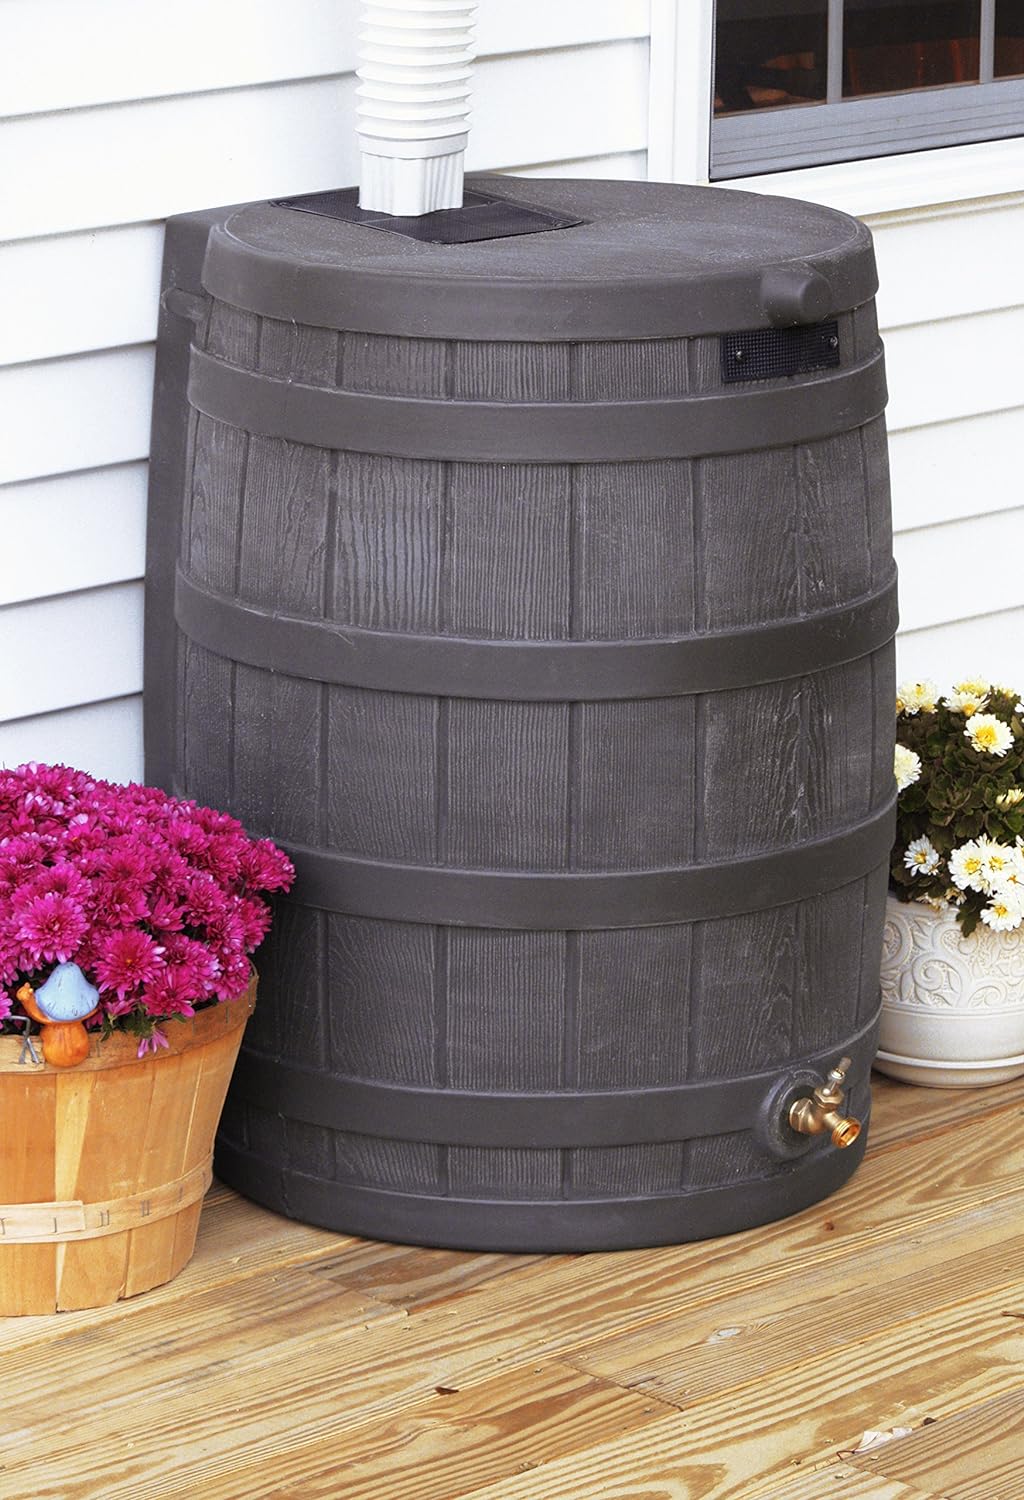 50 Gallon BPA-free Plastic Resin Rain Barrel for Outdoor Rainwater Collection and Storage Features a Metal Spigot